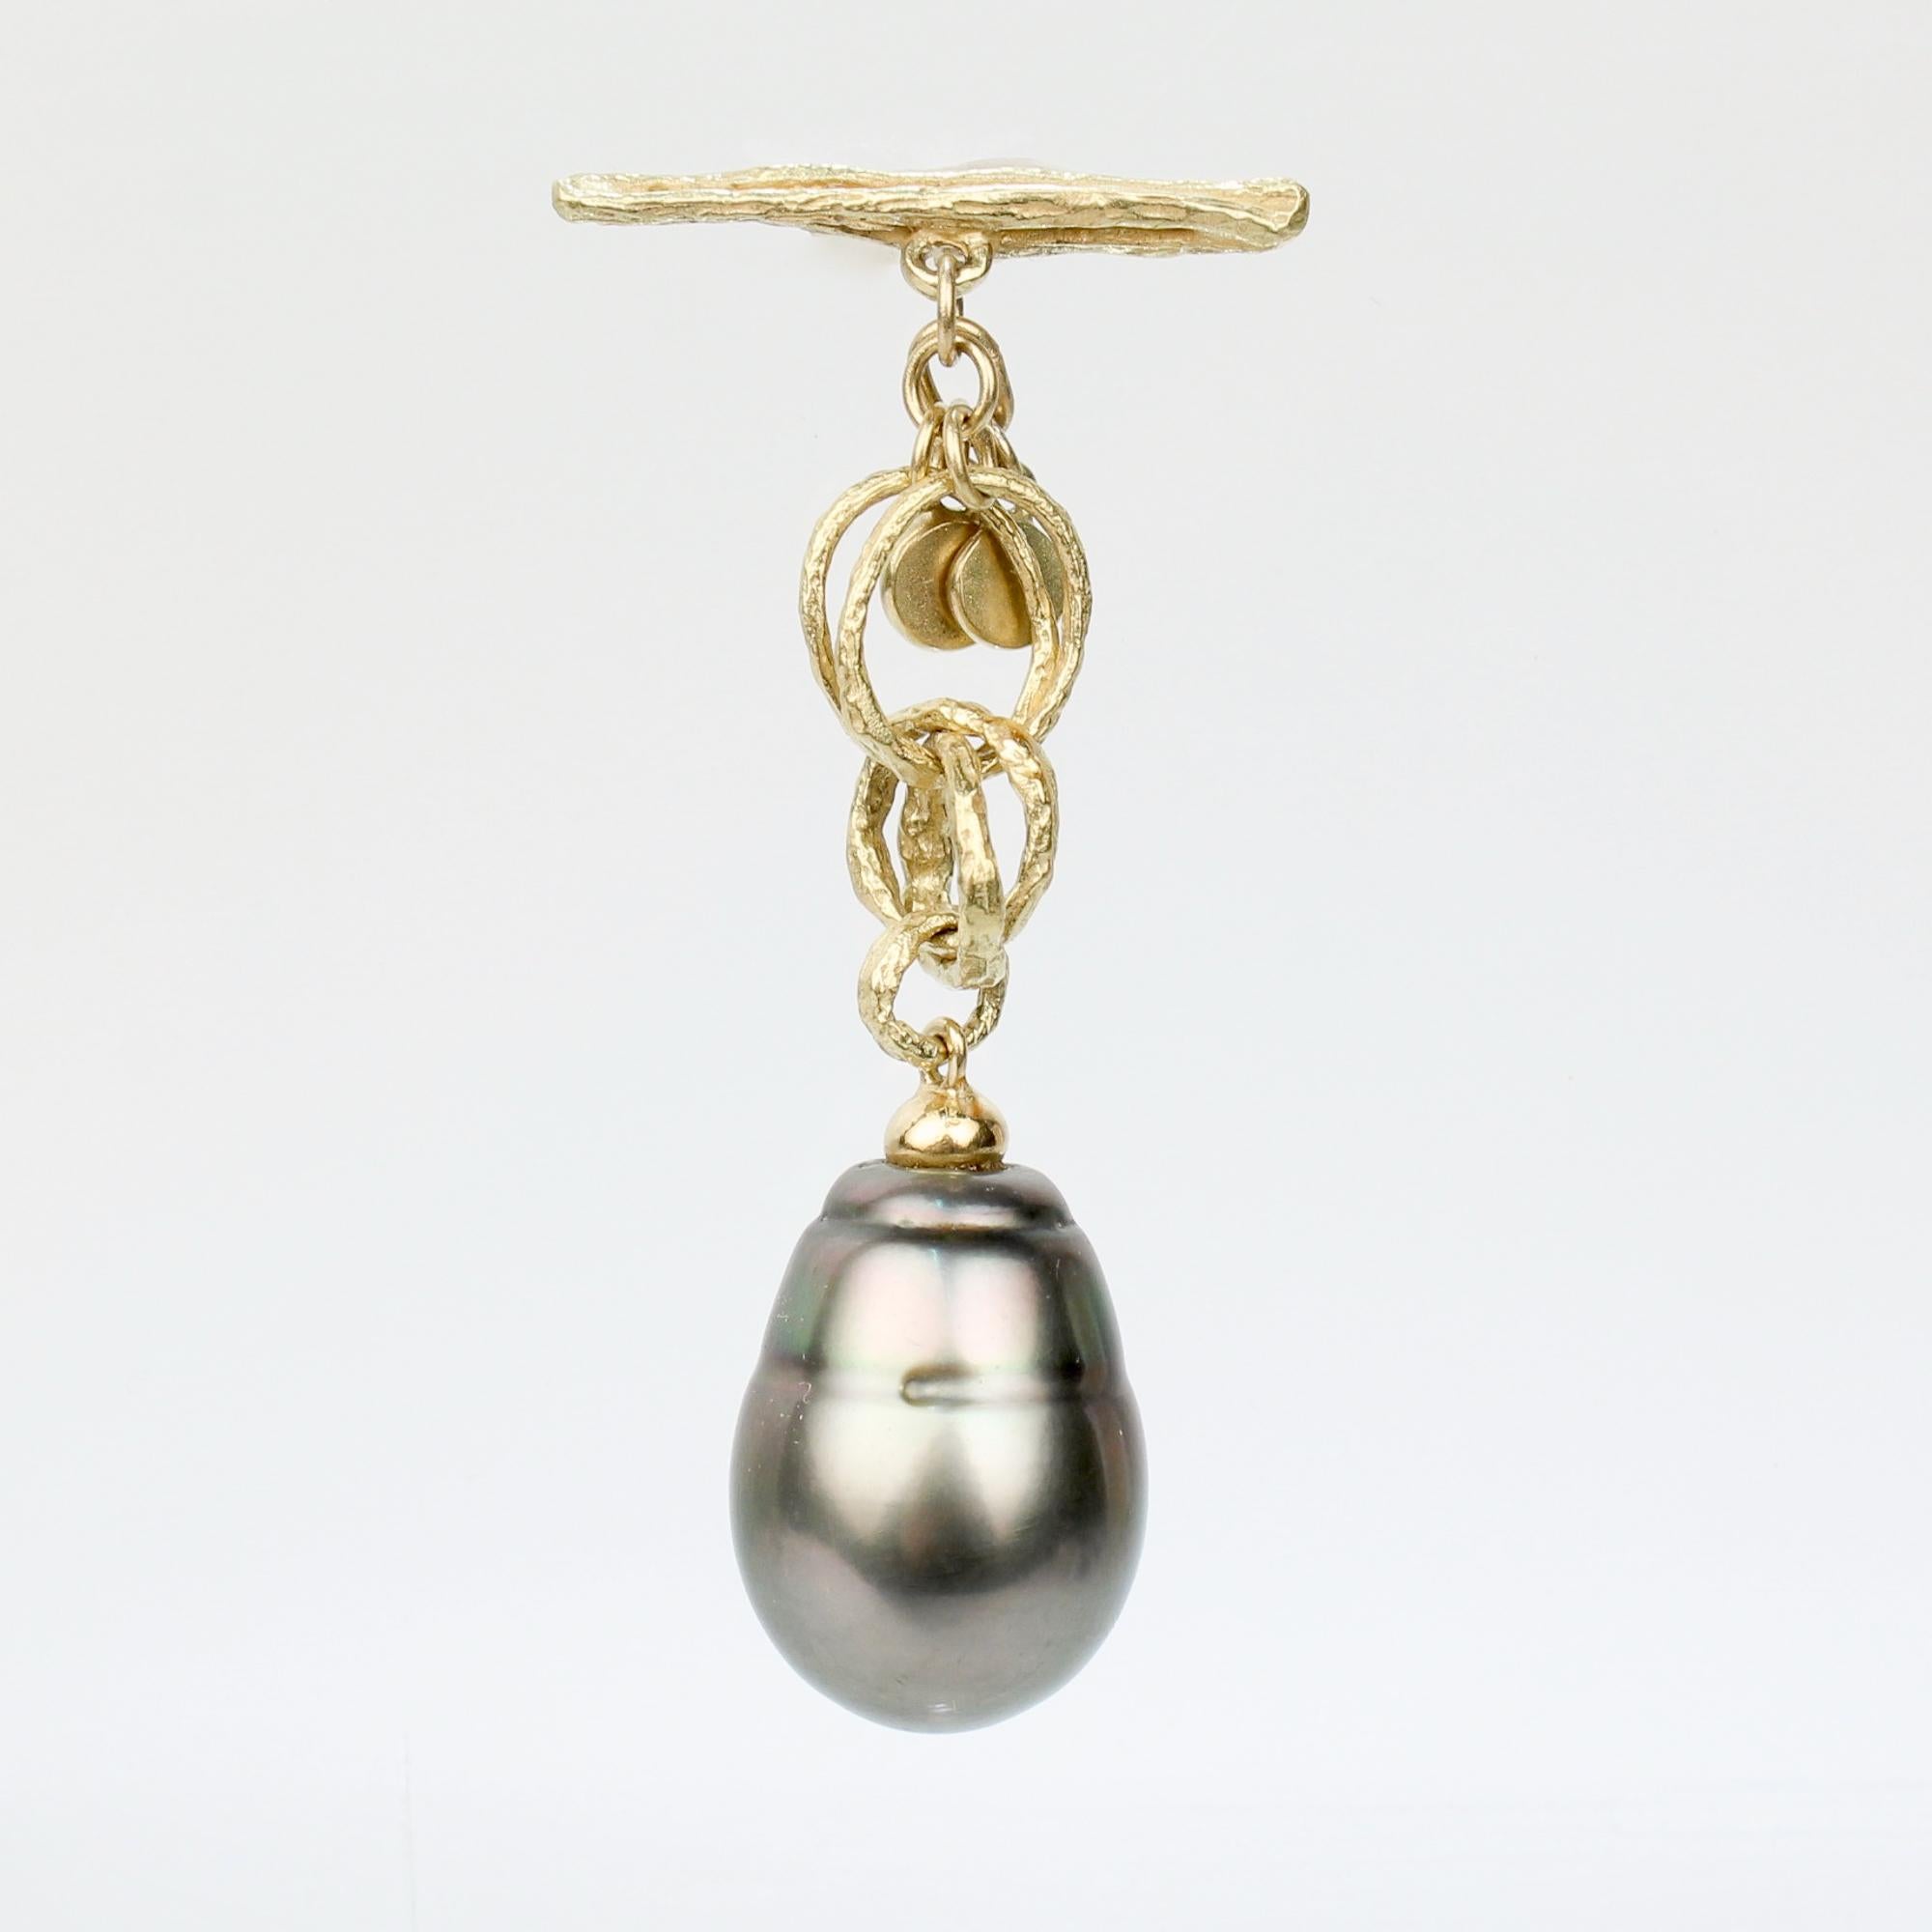 A fine gold & Baroque Tahitian pearl lapel button or fob.

In 18k gold.

Consisting of a gold toggle bar connected to multiple interlocking gold rings and terminating in a large Baroque Tahitian pearl.

Simply a wonderful lapel button or